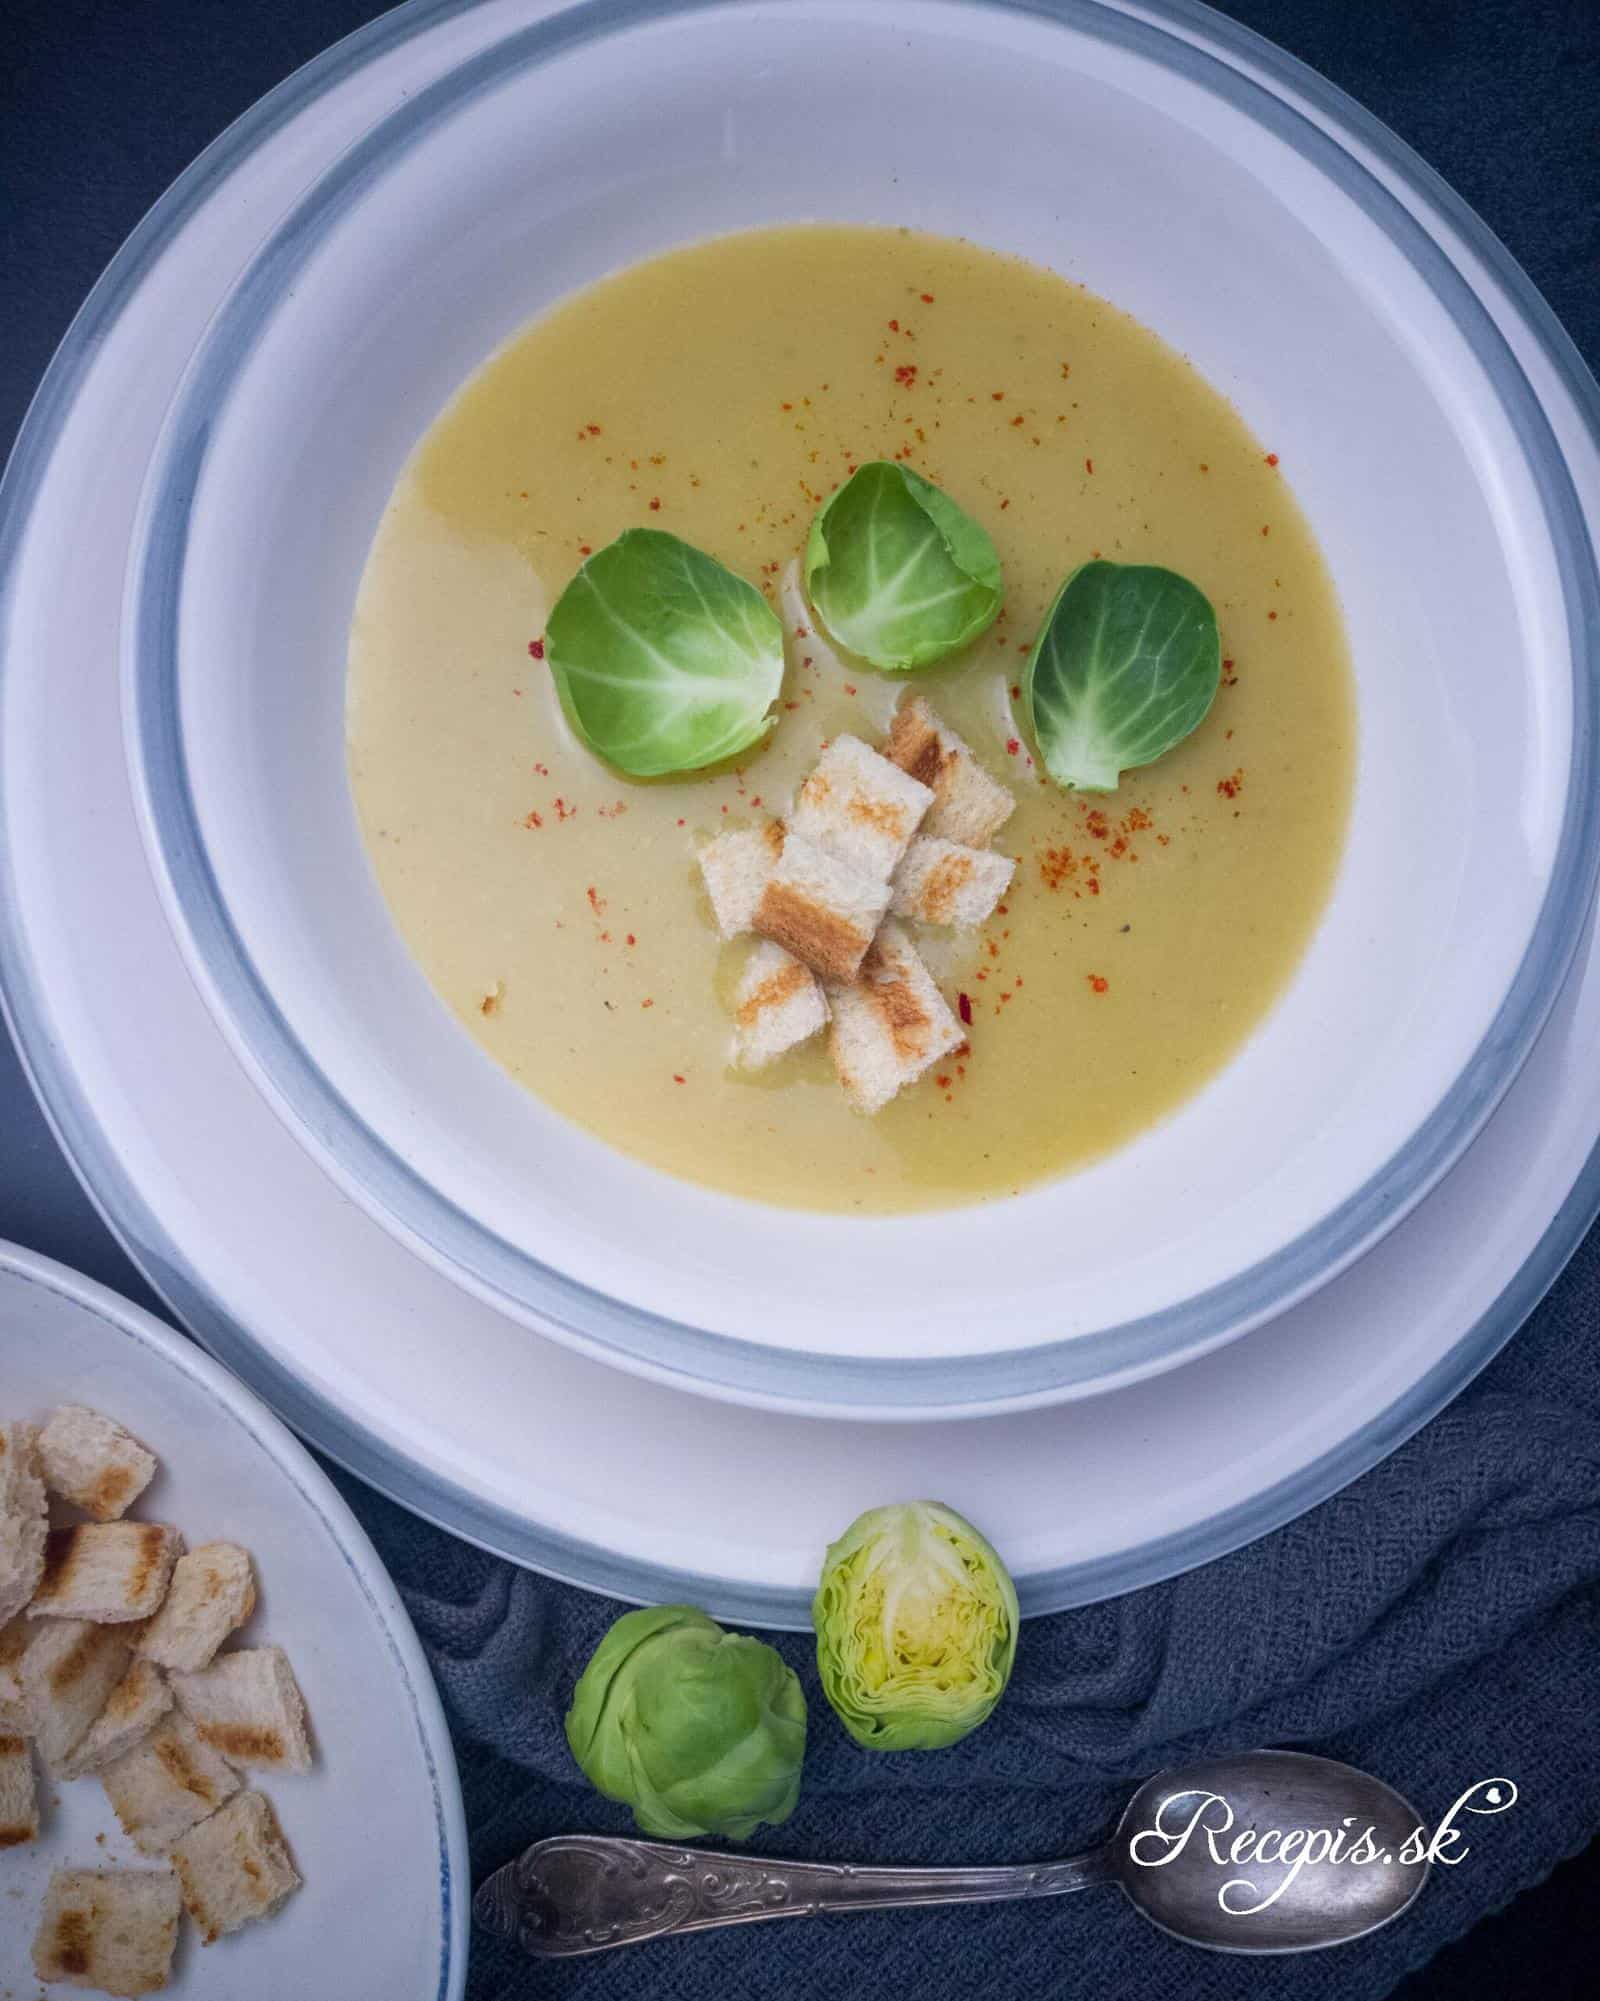 Creamy brussels sprouts soup